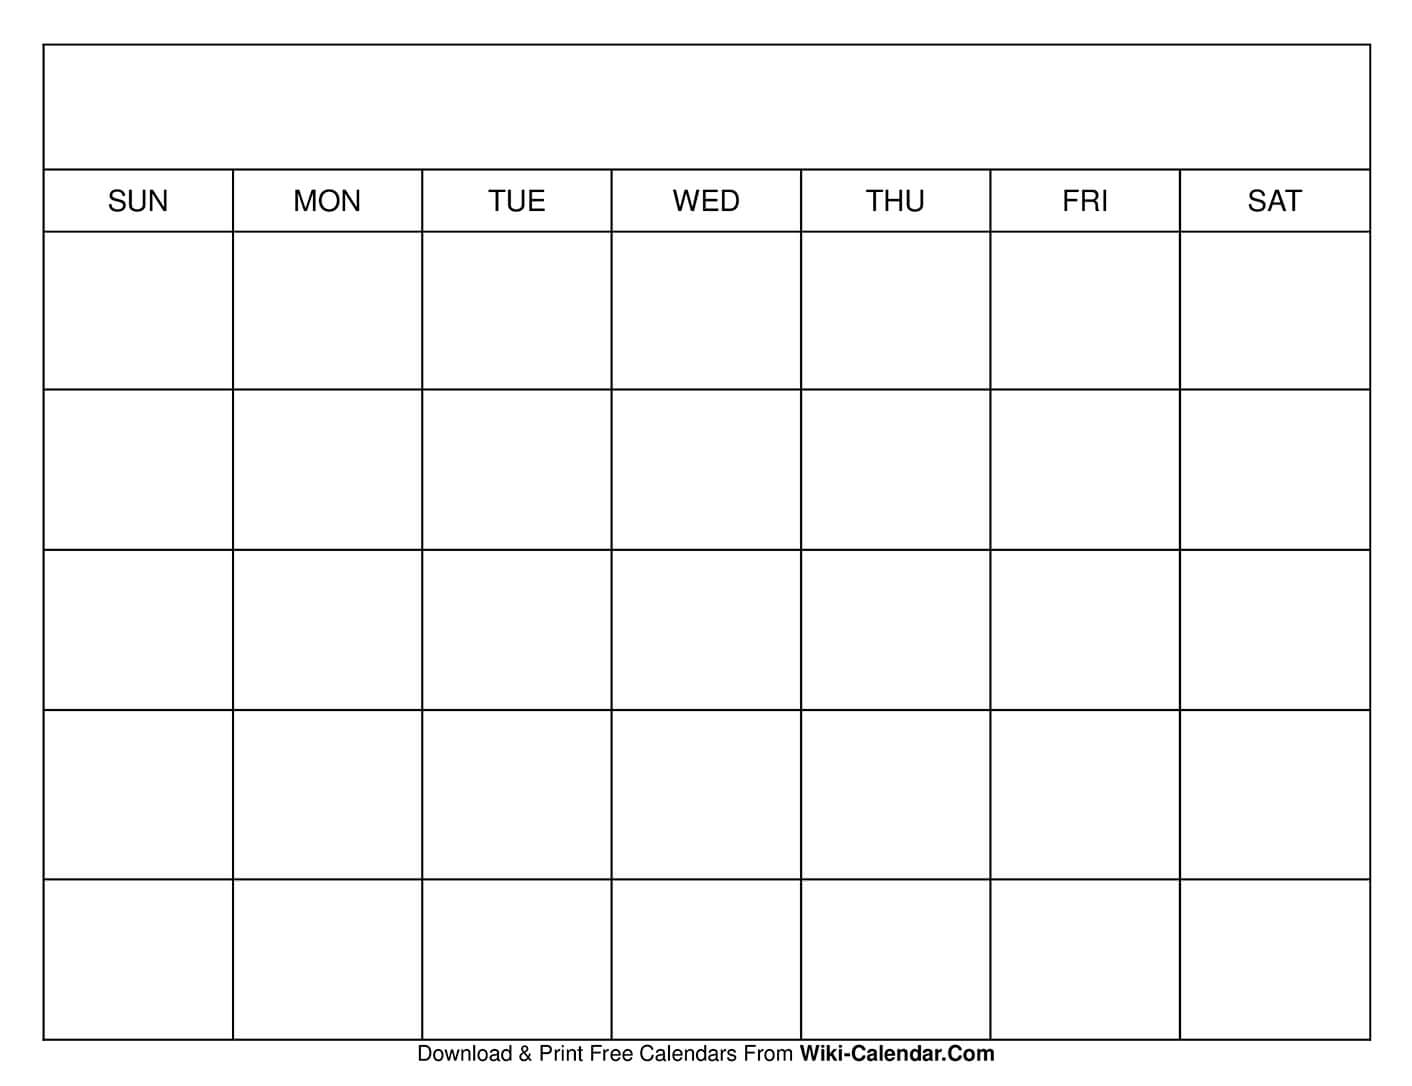 Free Printable Calendar No Download Required Best Calendar Example